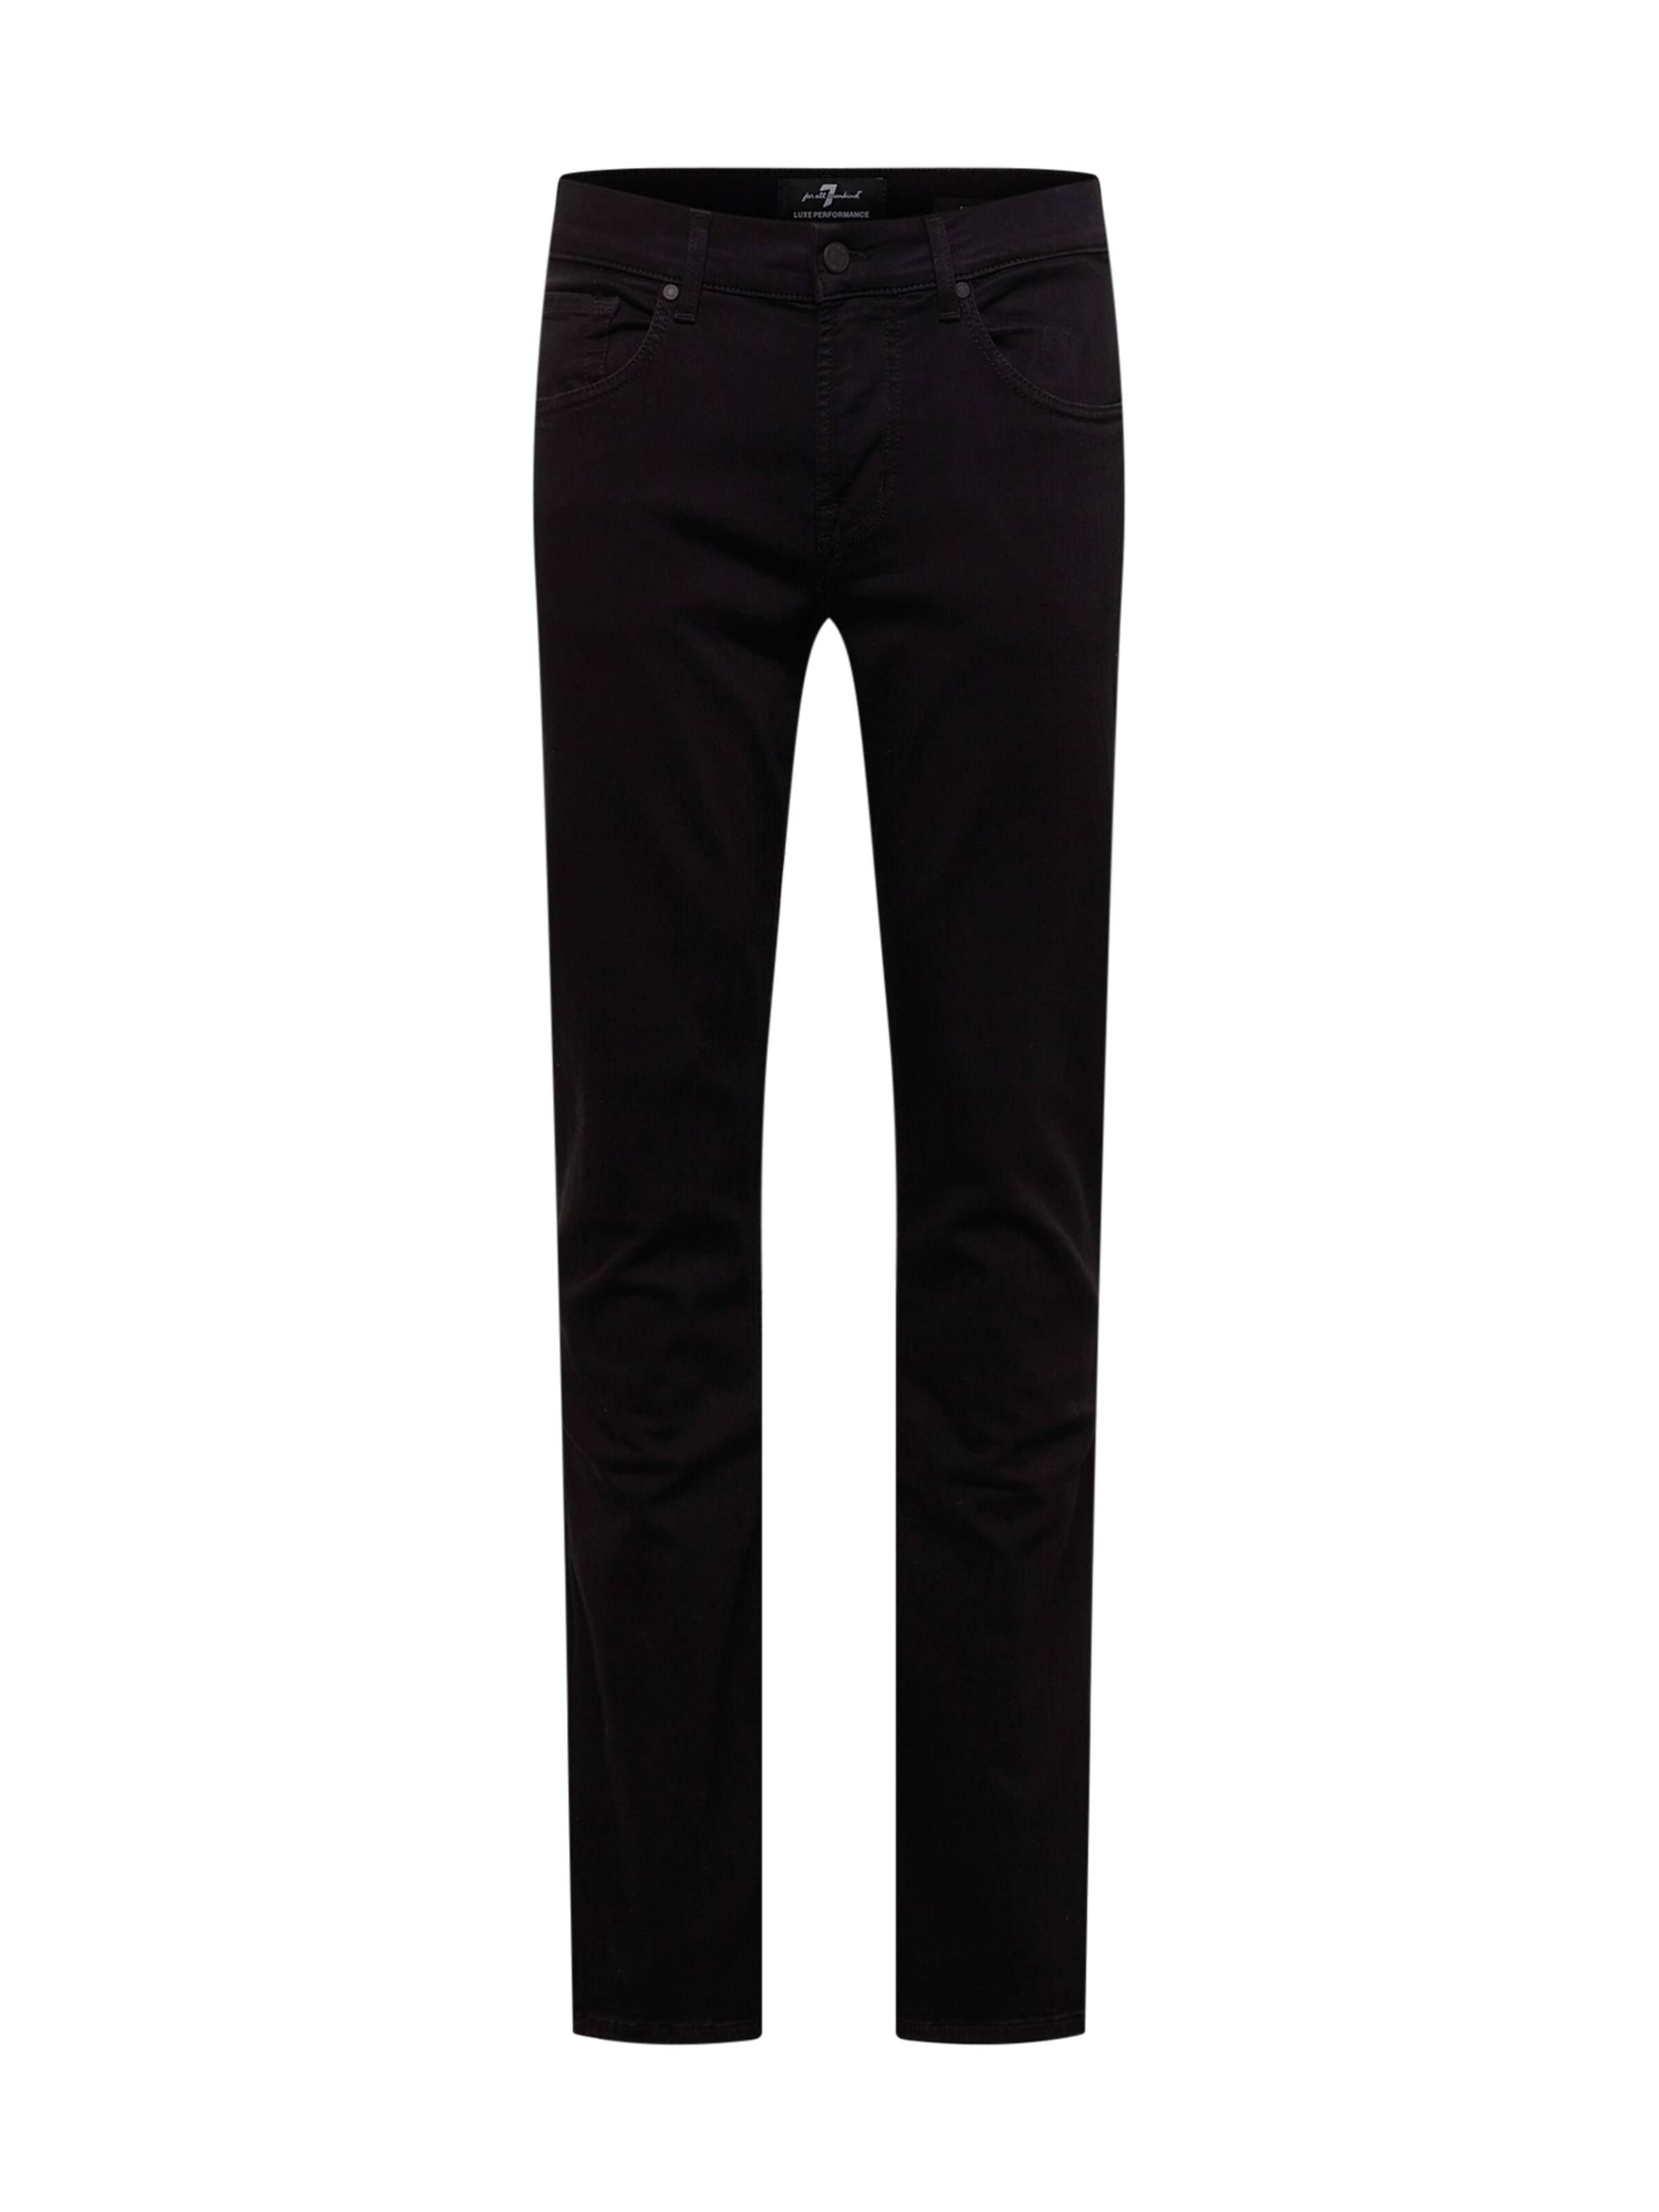 Männer Jeans 7 for all mankind Jeans in Schwarz - WU92680